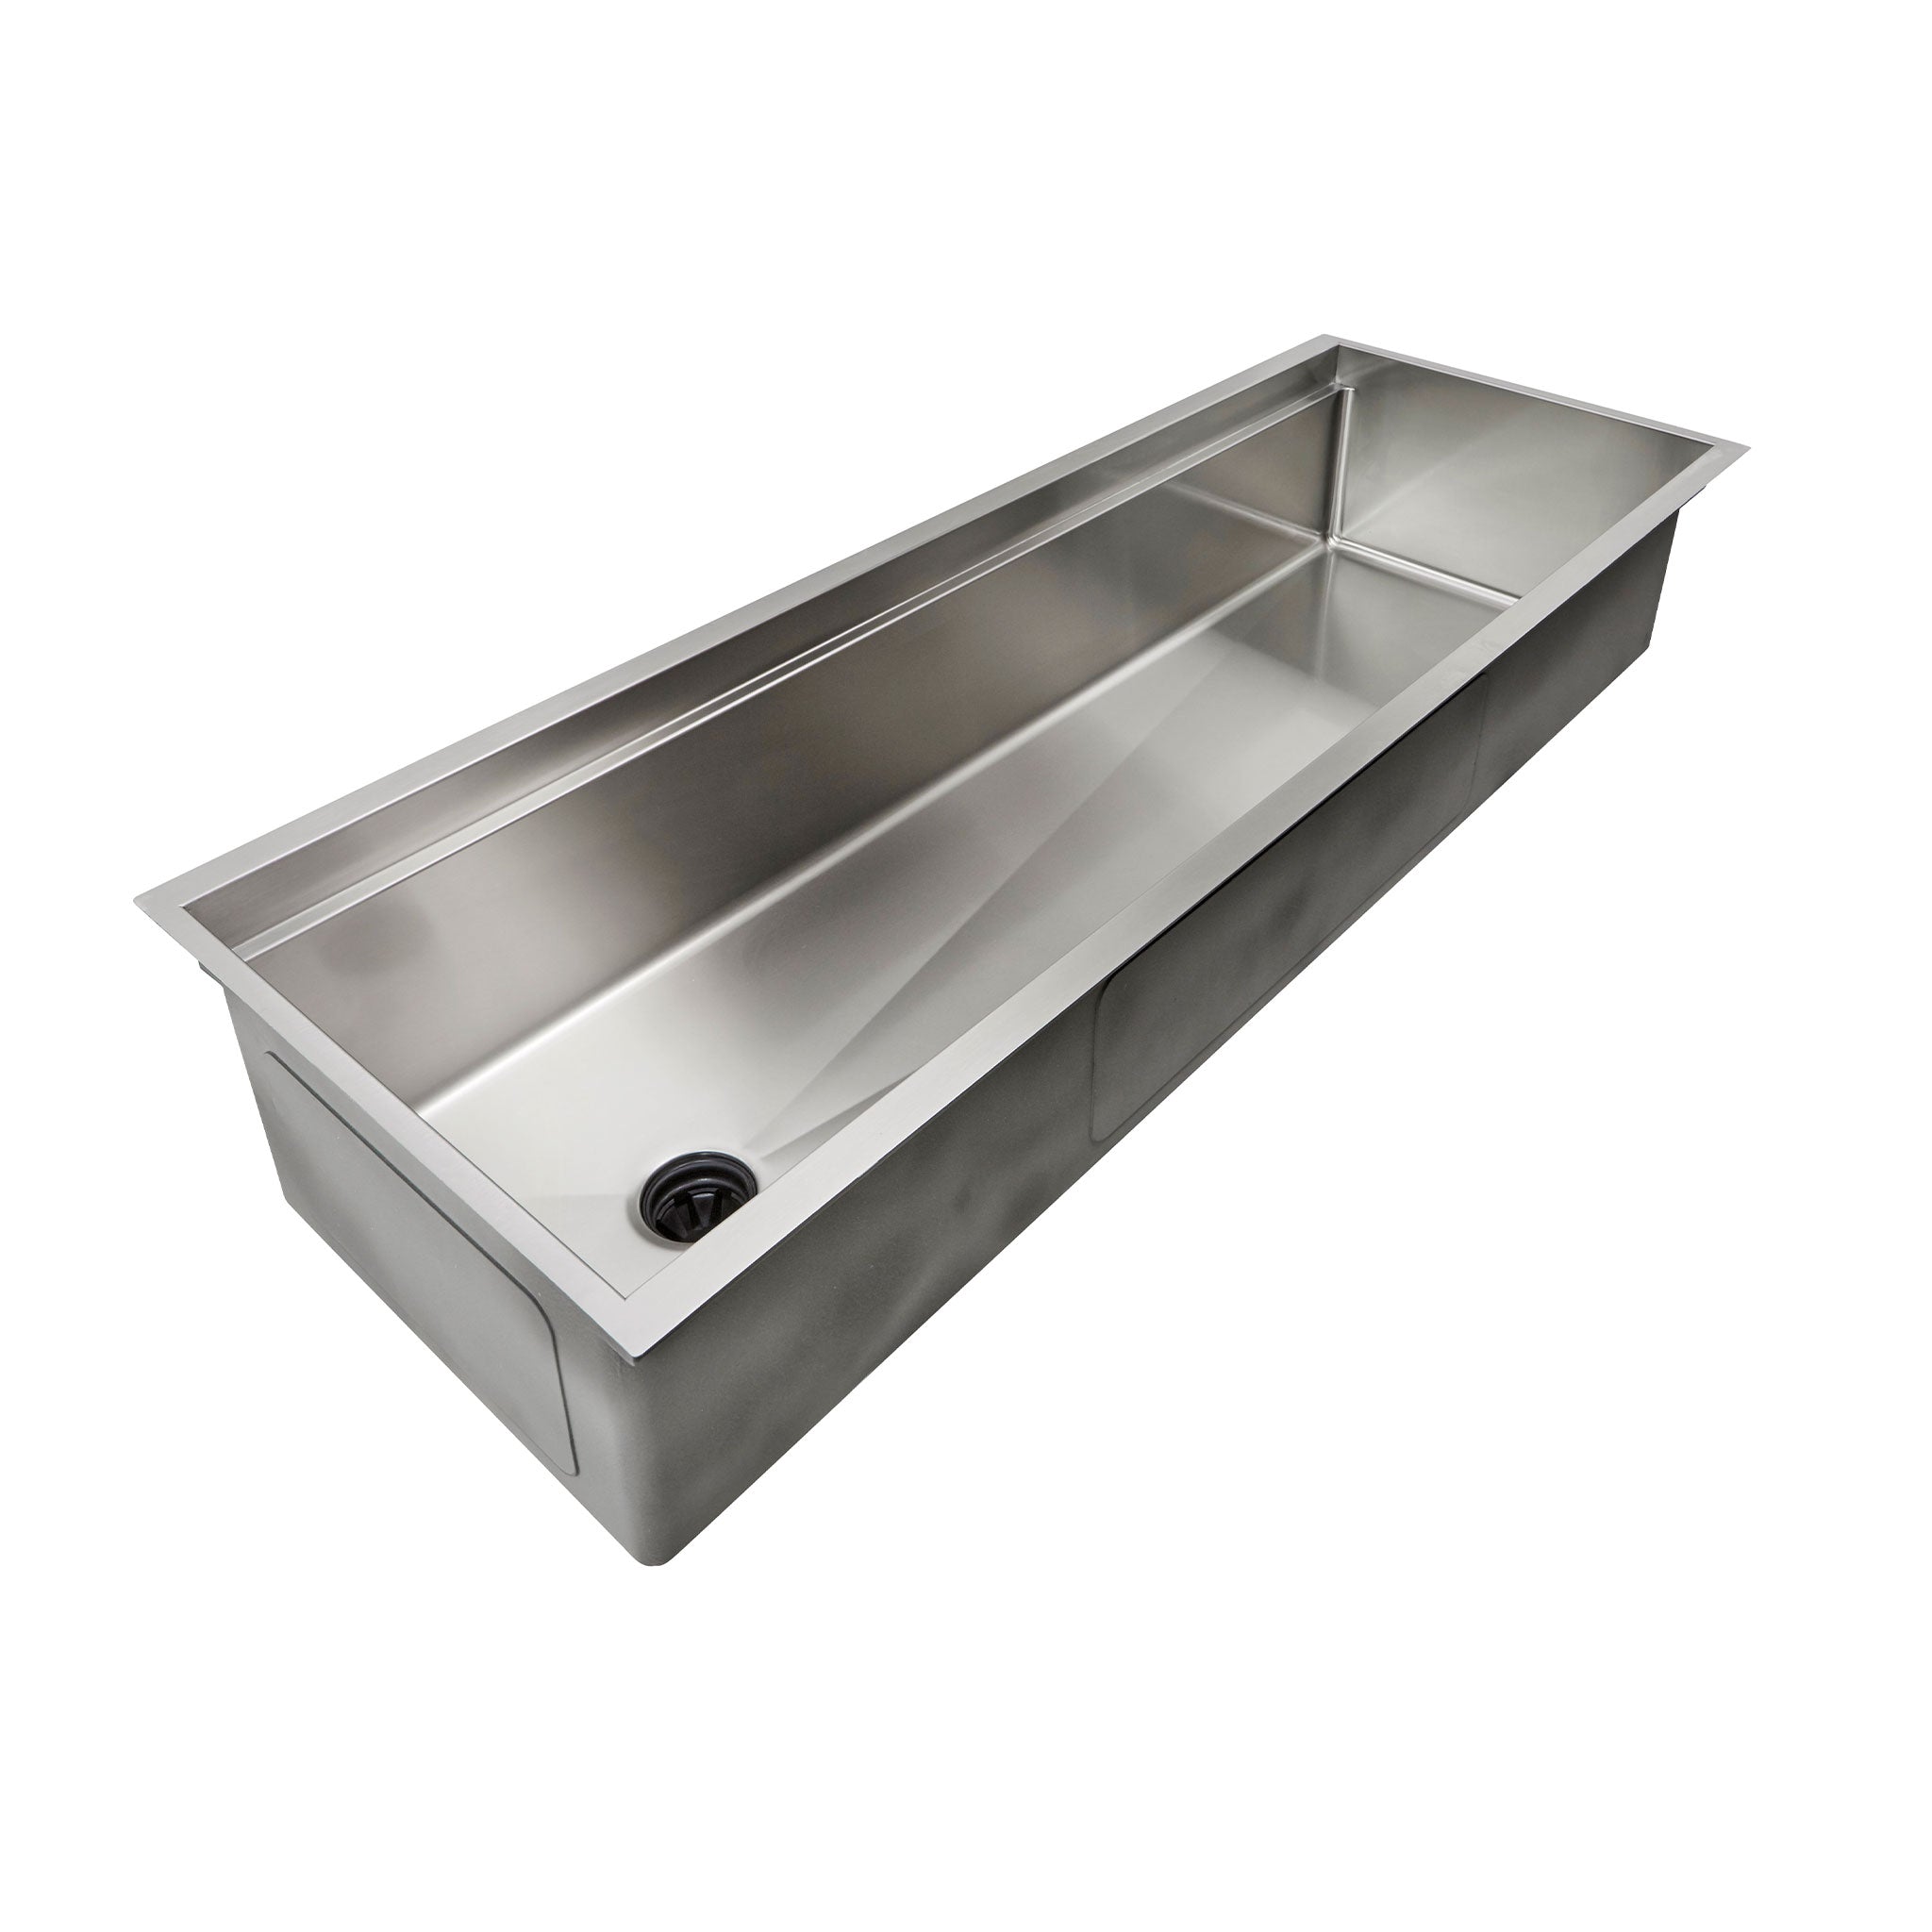 Create Good Sinks 56 inch undermount single bowl workstation kitchen sink. 5 foot single basin sink with offset seamless drain and built in ledge for sink accessories 